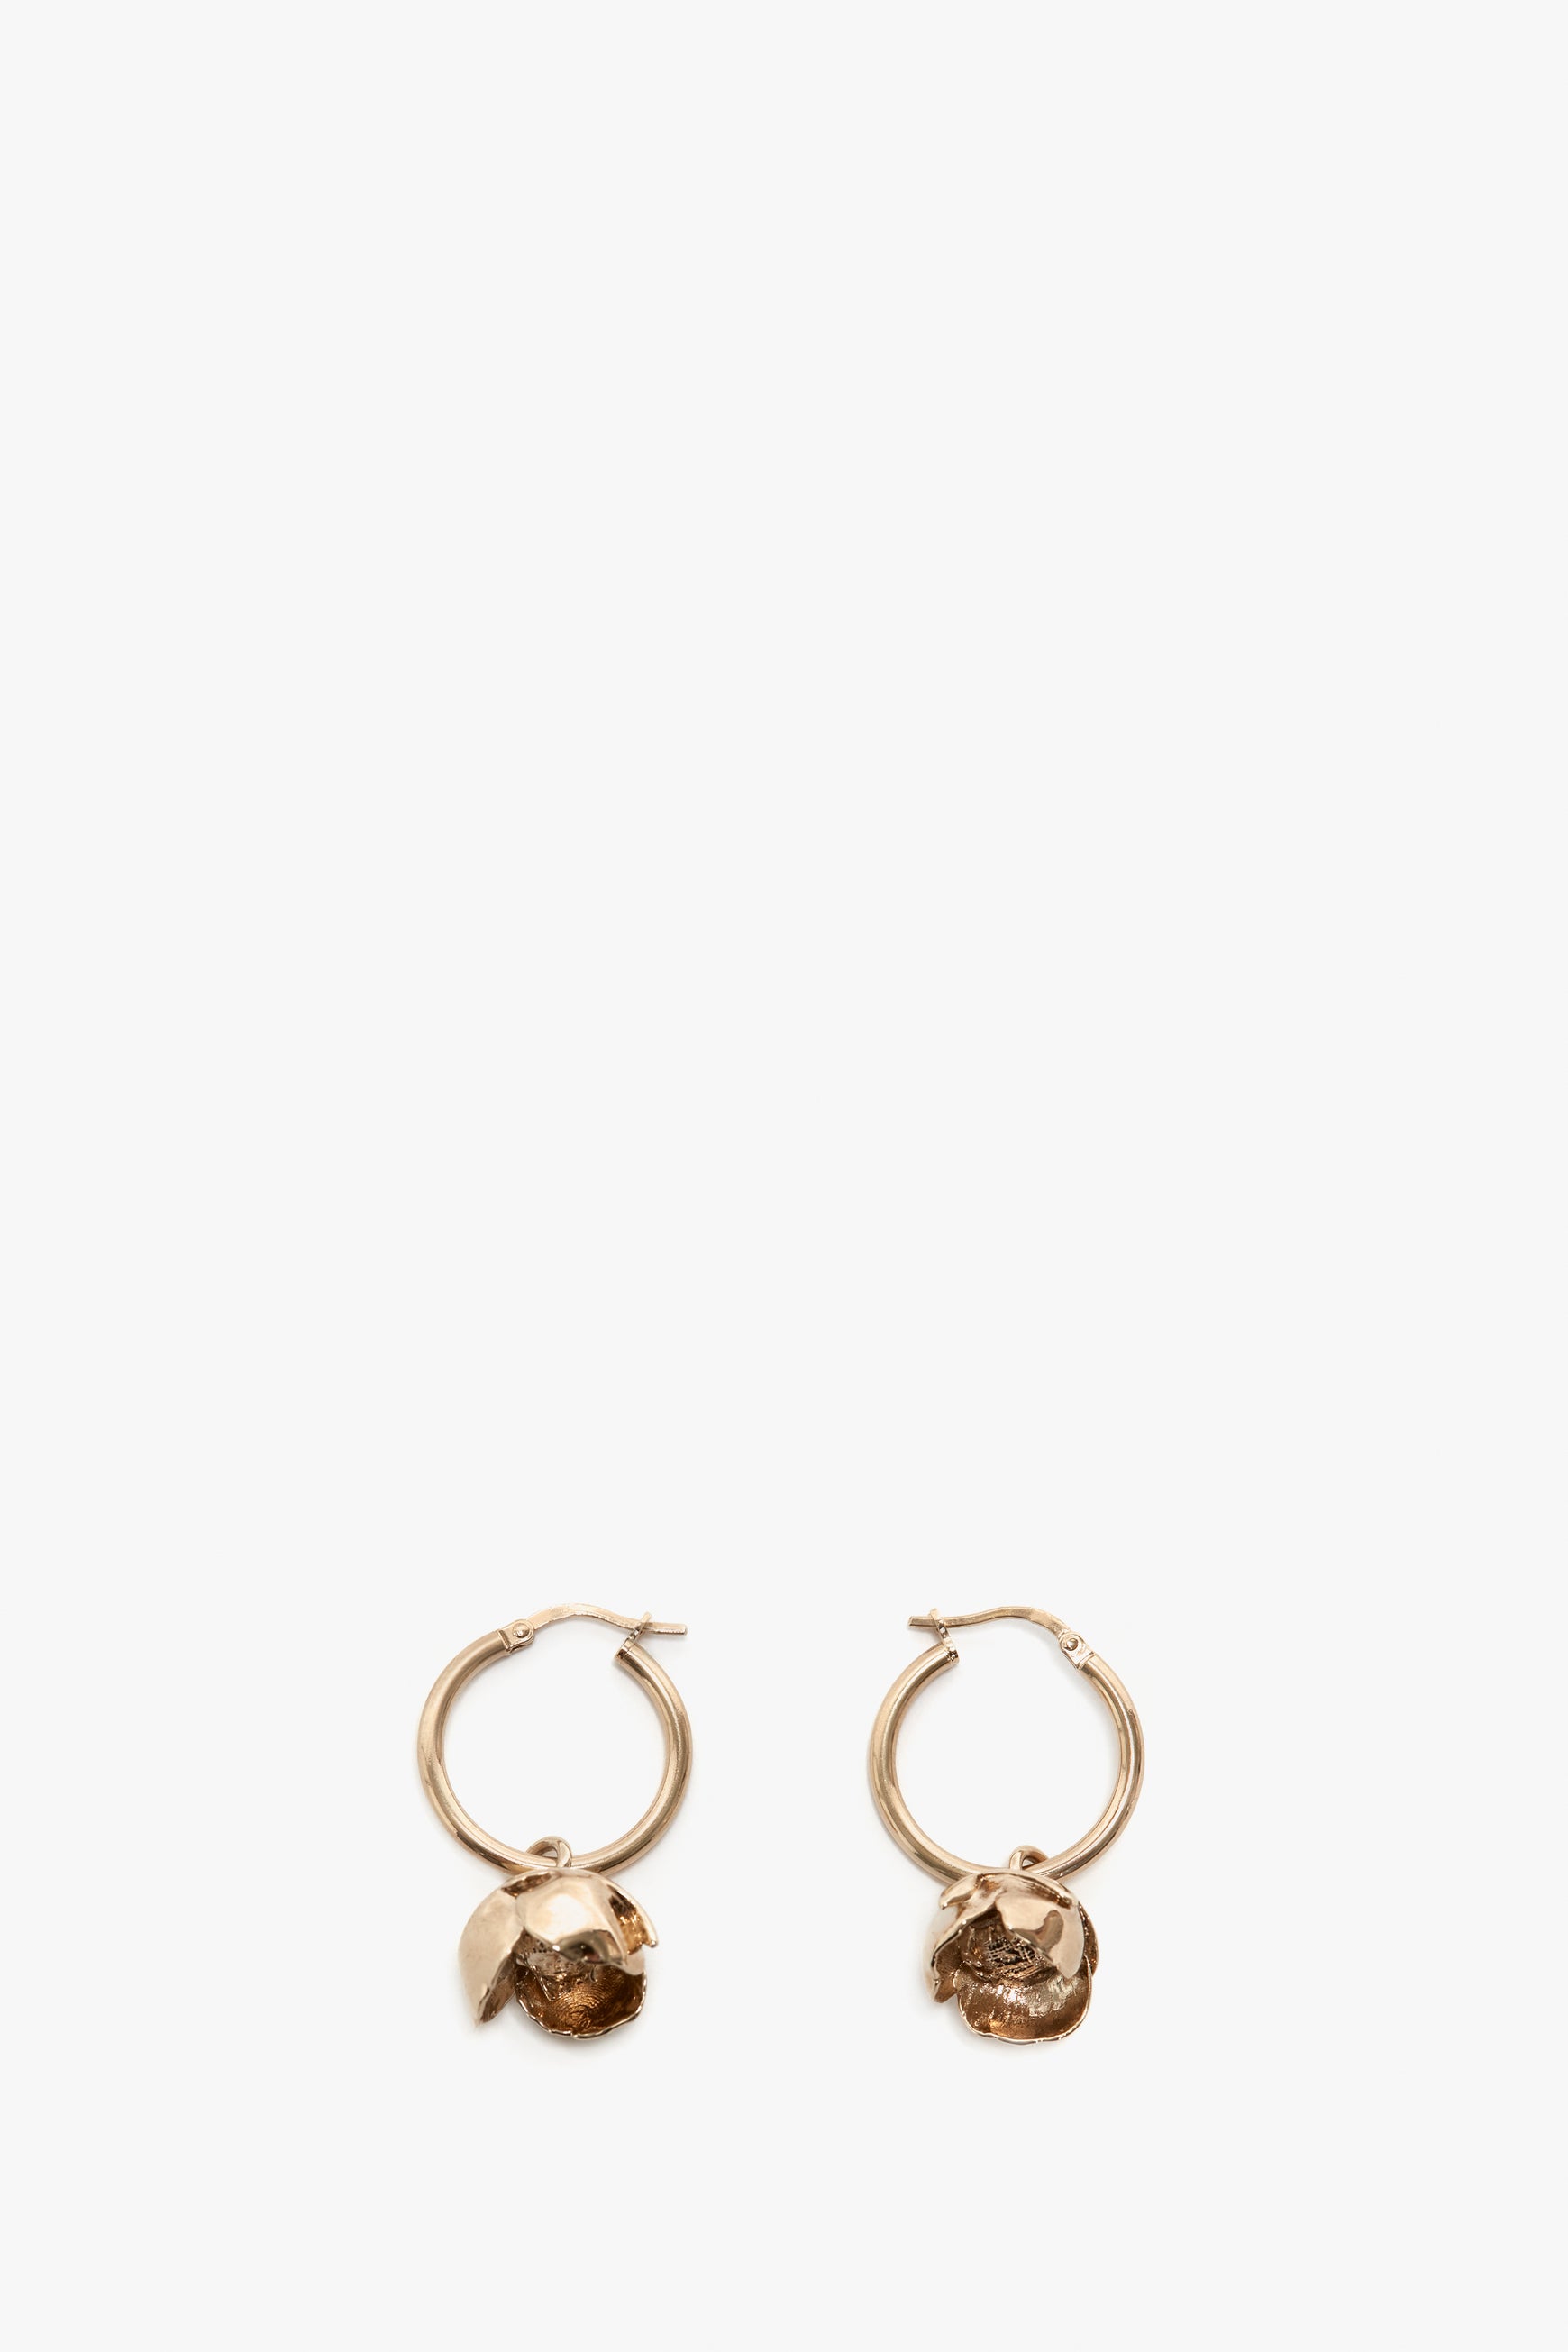 A pair of Exclusive Camellia Flower Hoop Earrings in Gold with attached rough-cut gemstones, displayed against a plain white background by Victoria Beckham.